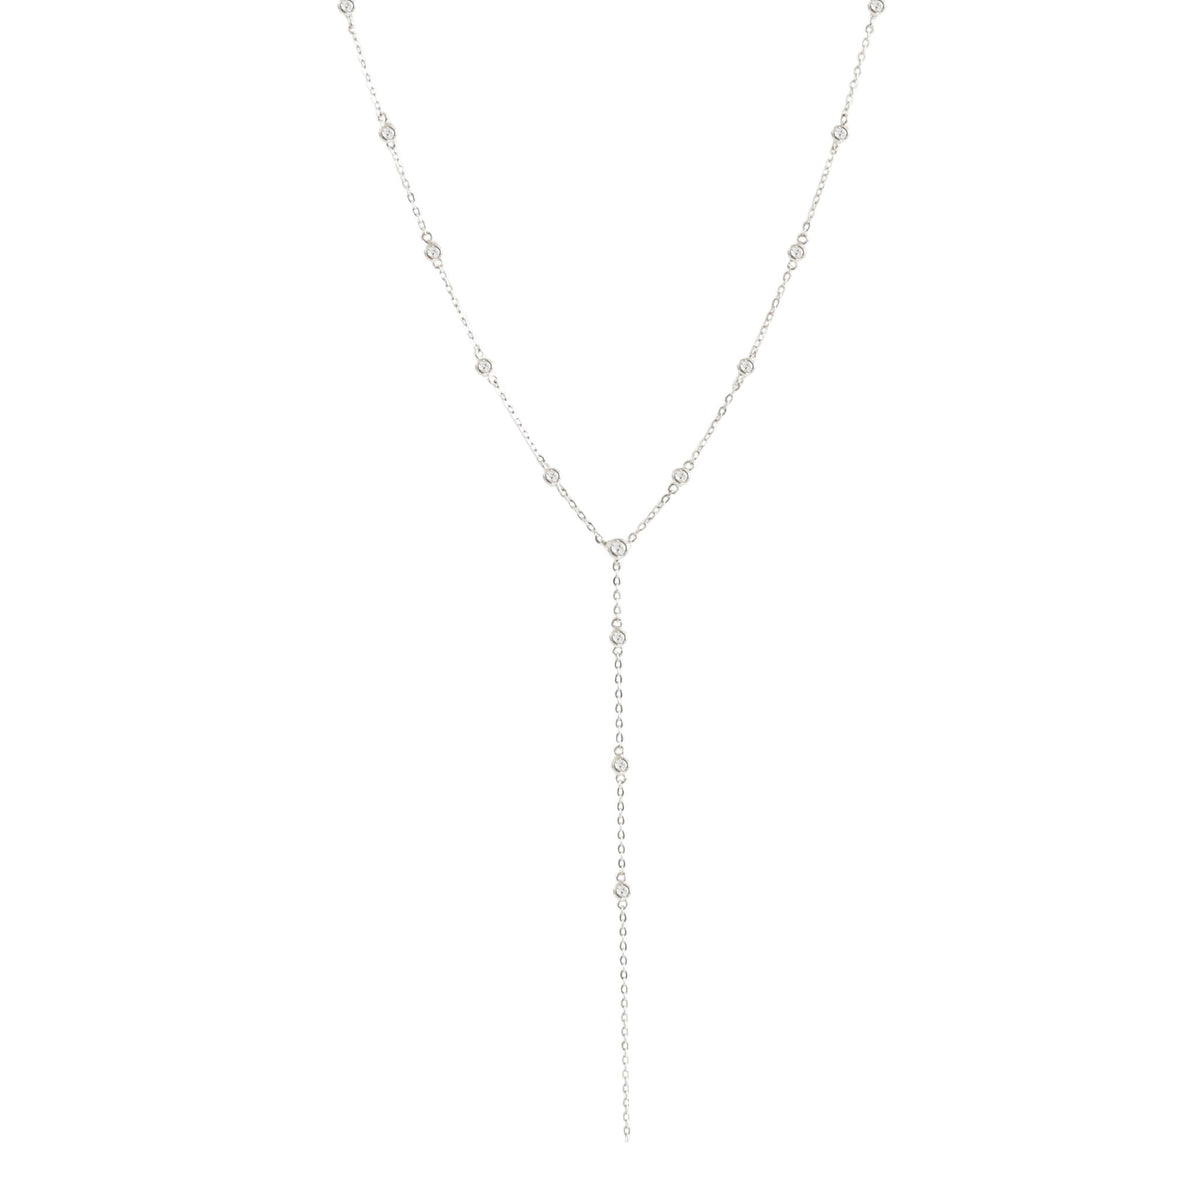 DAY 8 - DAINTY RADIANT LARIAT NECKLACE - CUBIC ZIRCONIA - SO PRETTY CARA COTTER